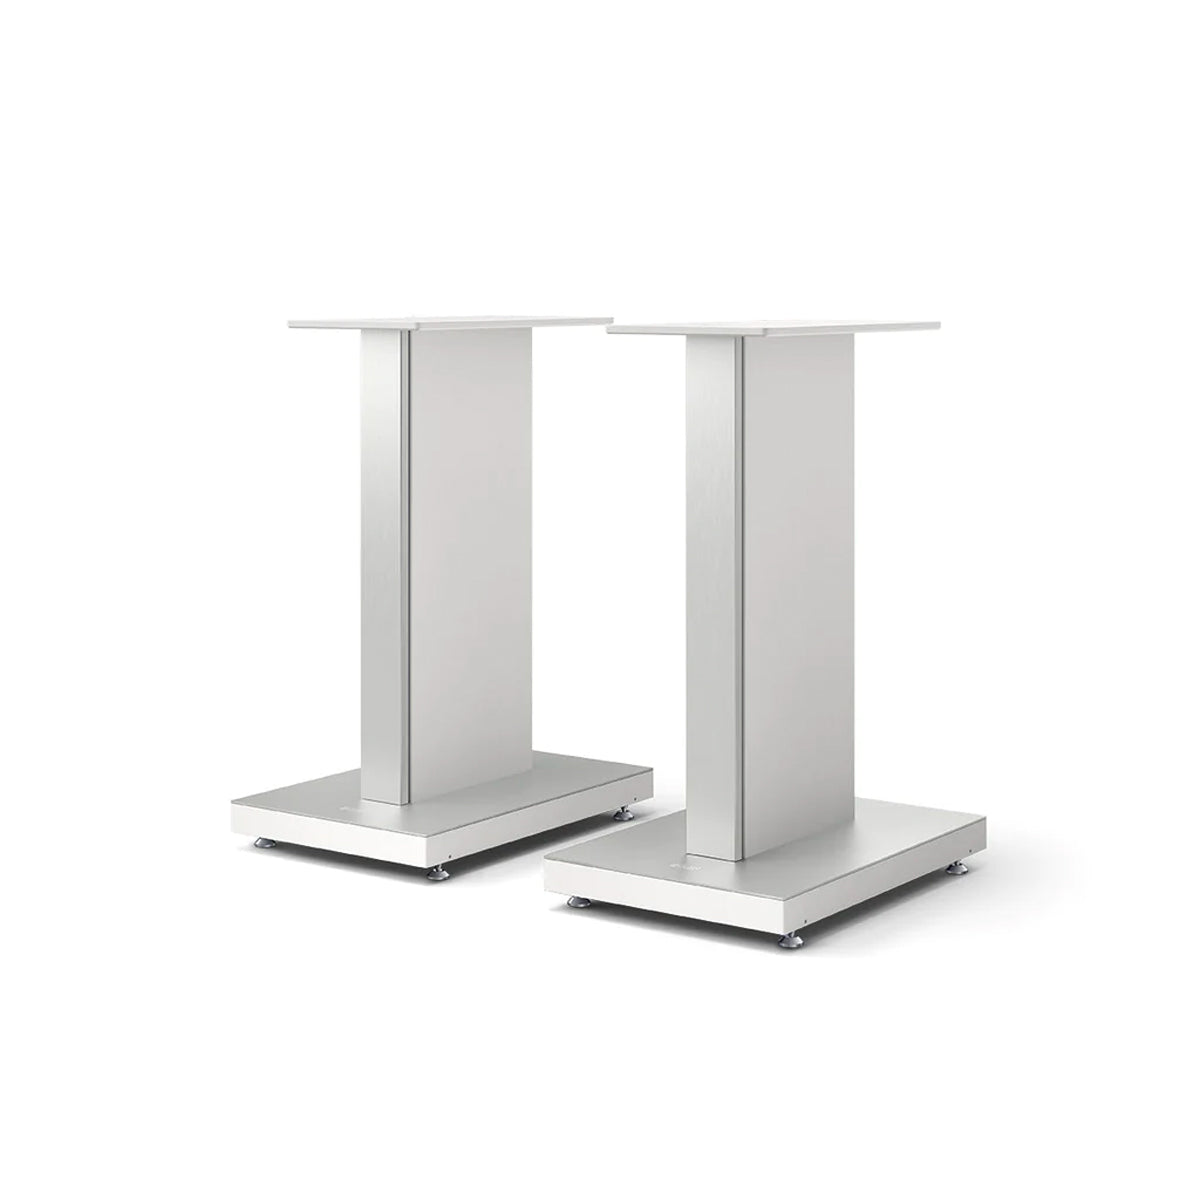 KEF S-RF1 Floor Stands - Mineral White (Pair) - The Audio Experts